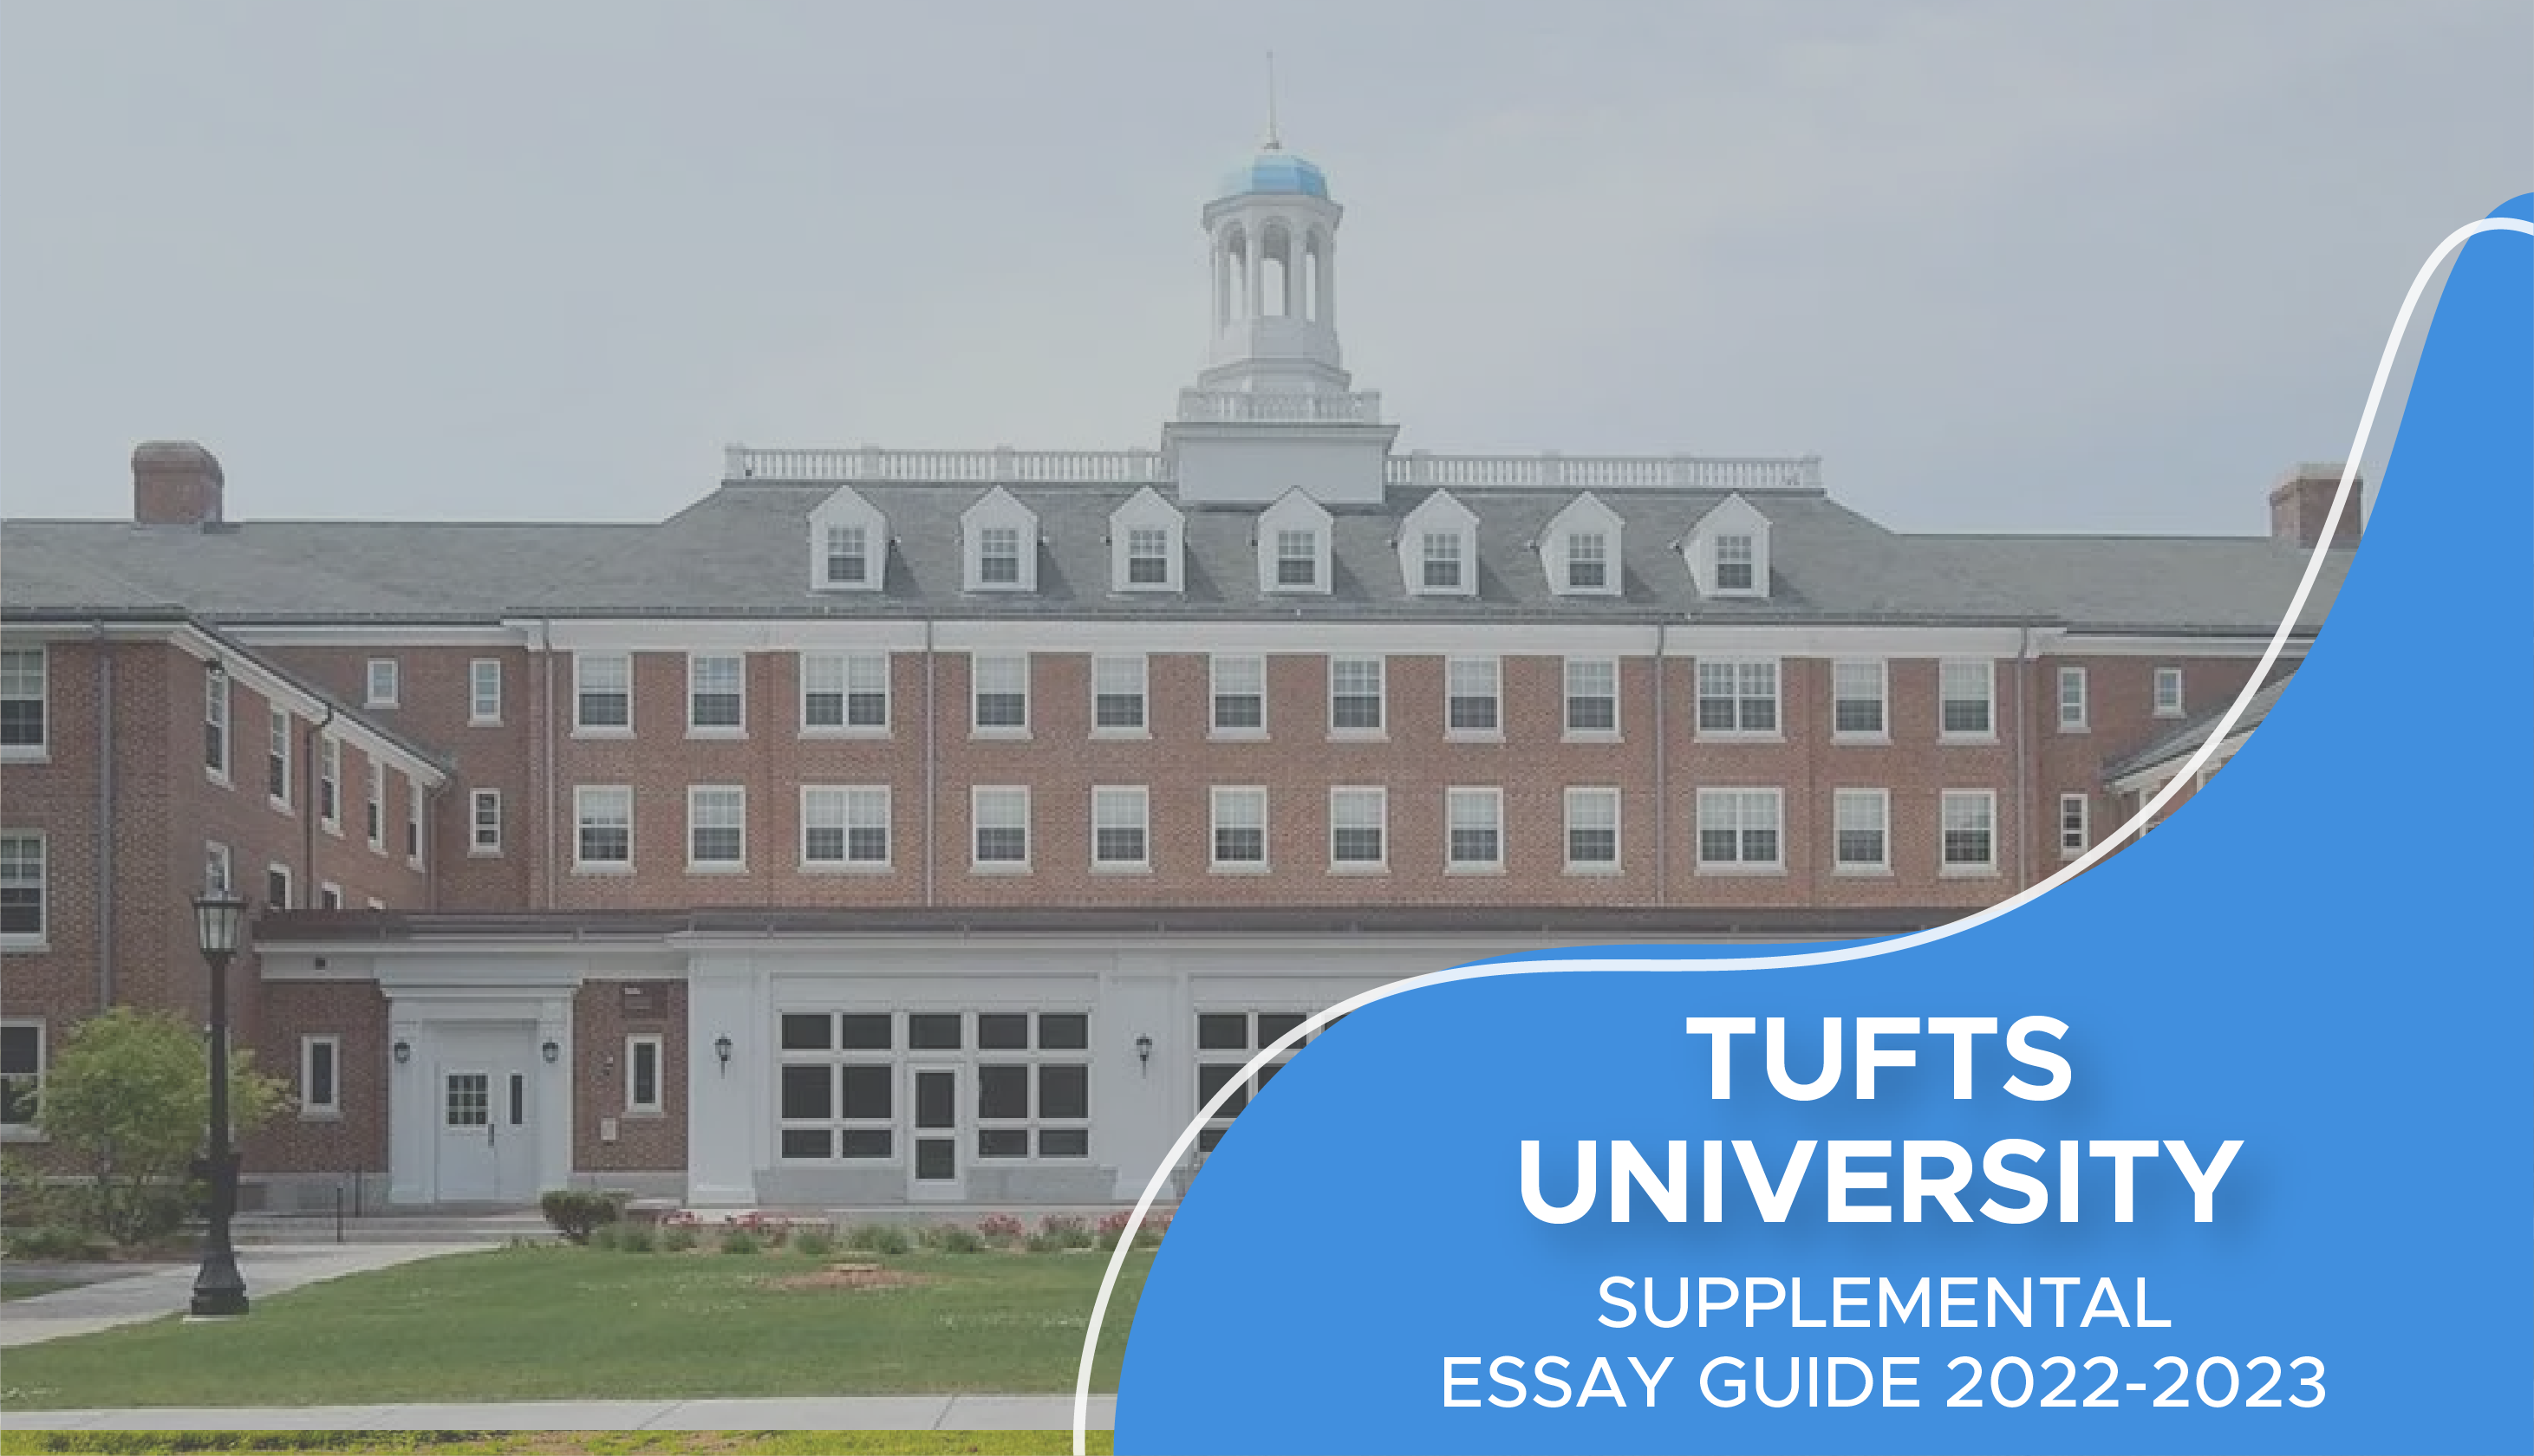 tufts community essay examples